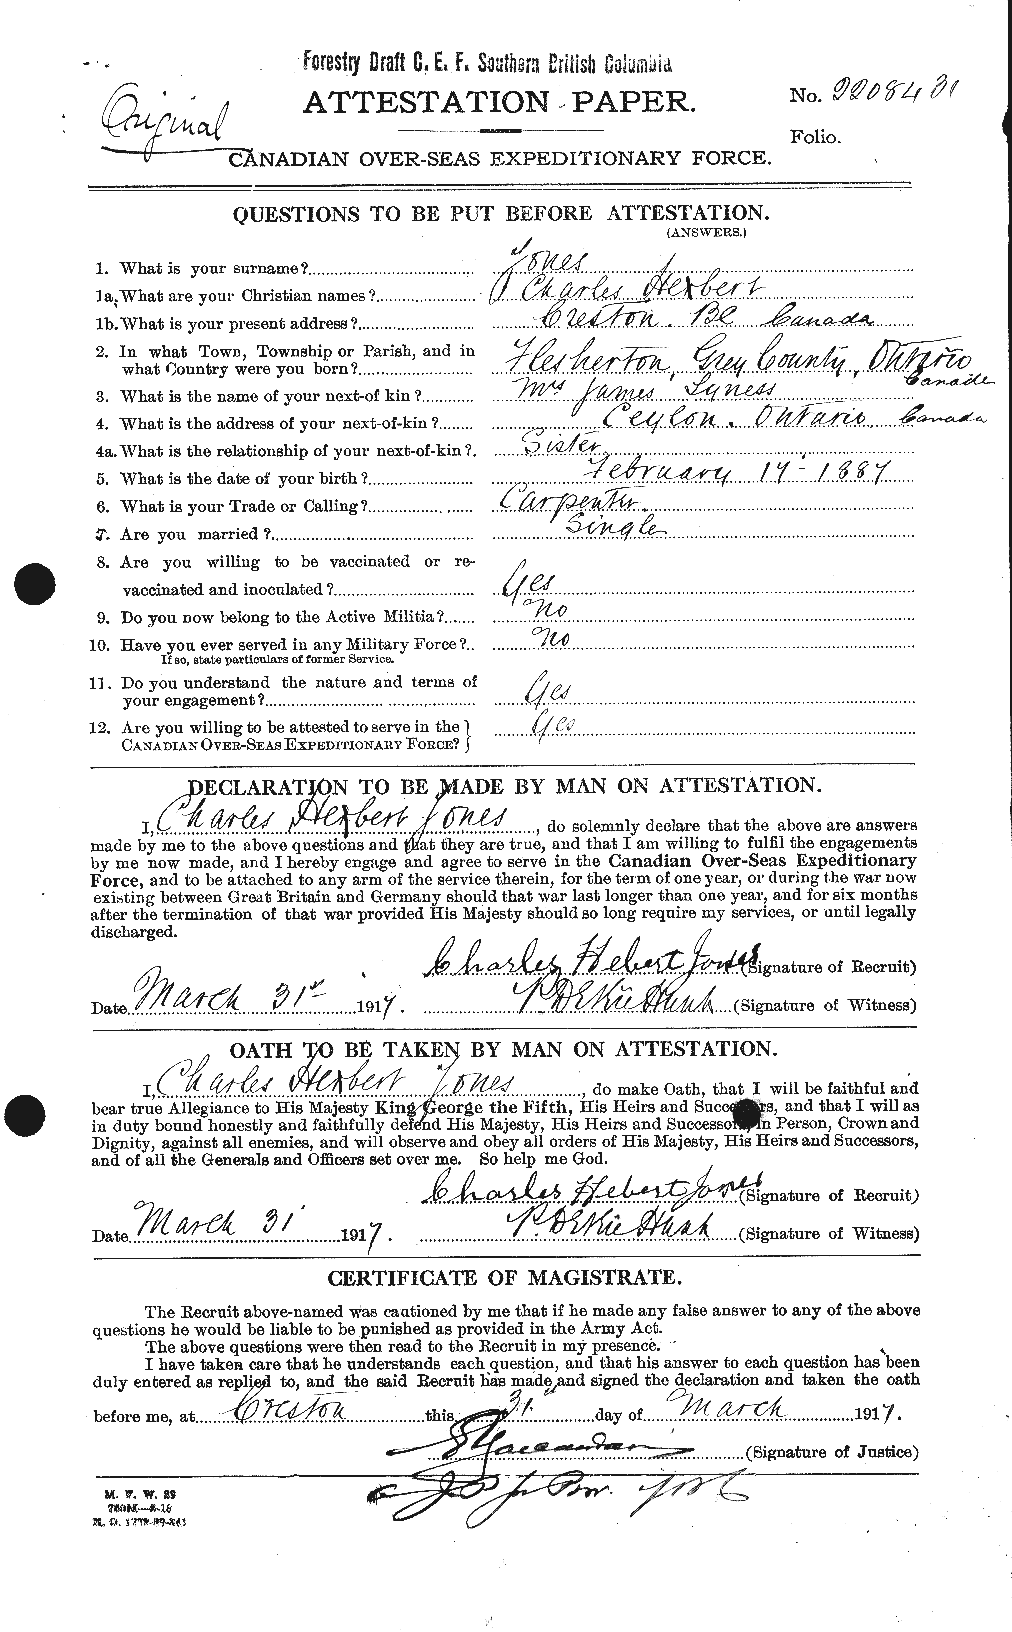 Personnel Records of the First World War - CEF 423846a